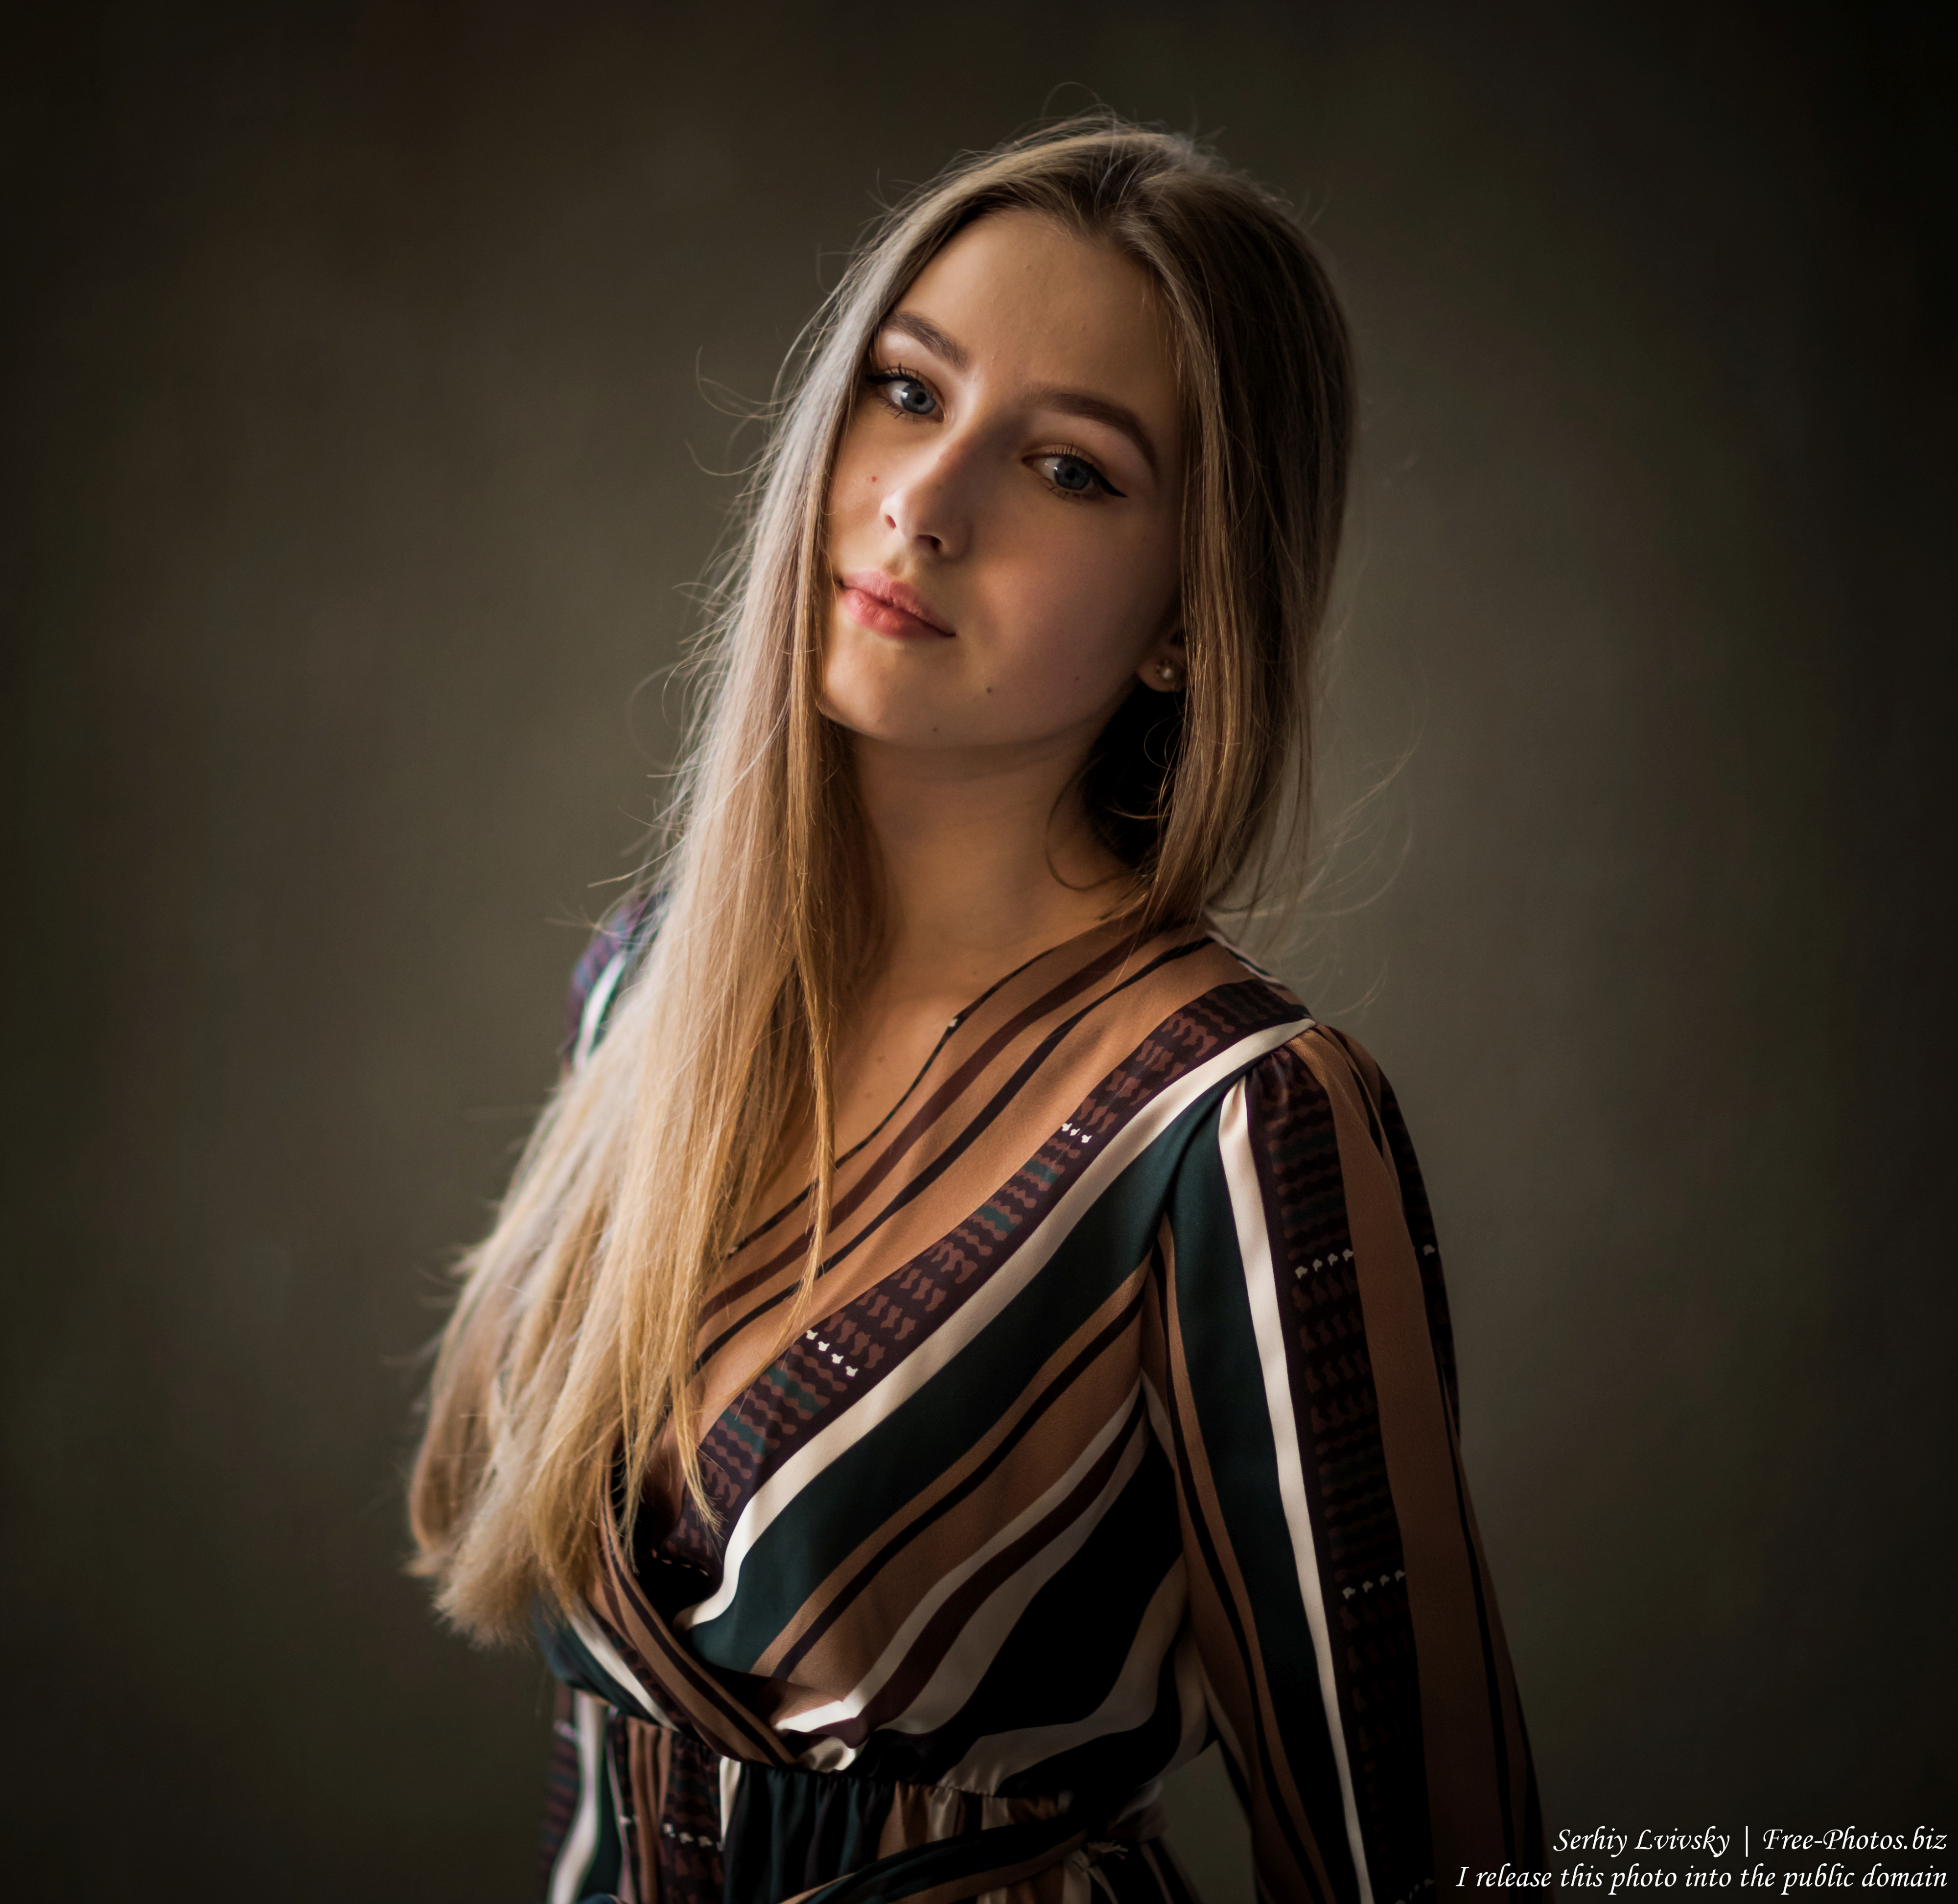 vika_a_17-year-old_girl_with_blue_eyes_and_natural_fair_hair_in_june_2019_by_serhiy_lvivsky_21